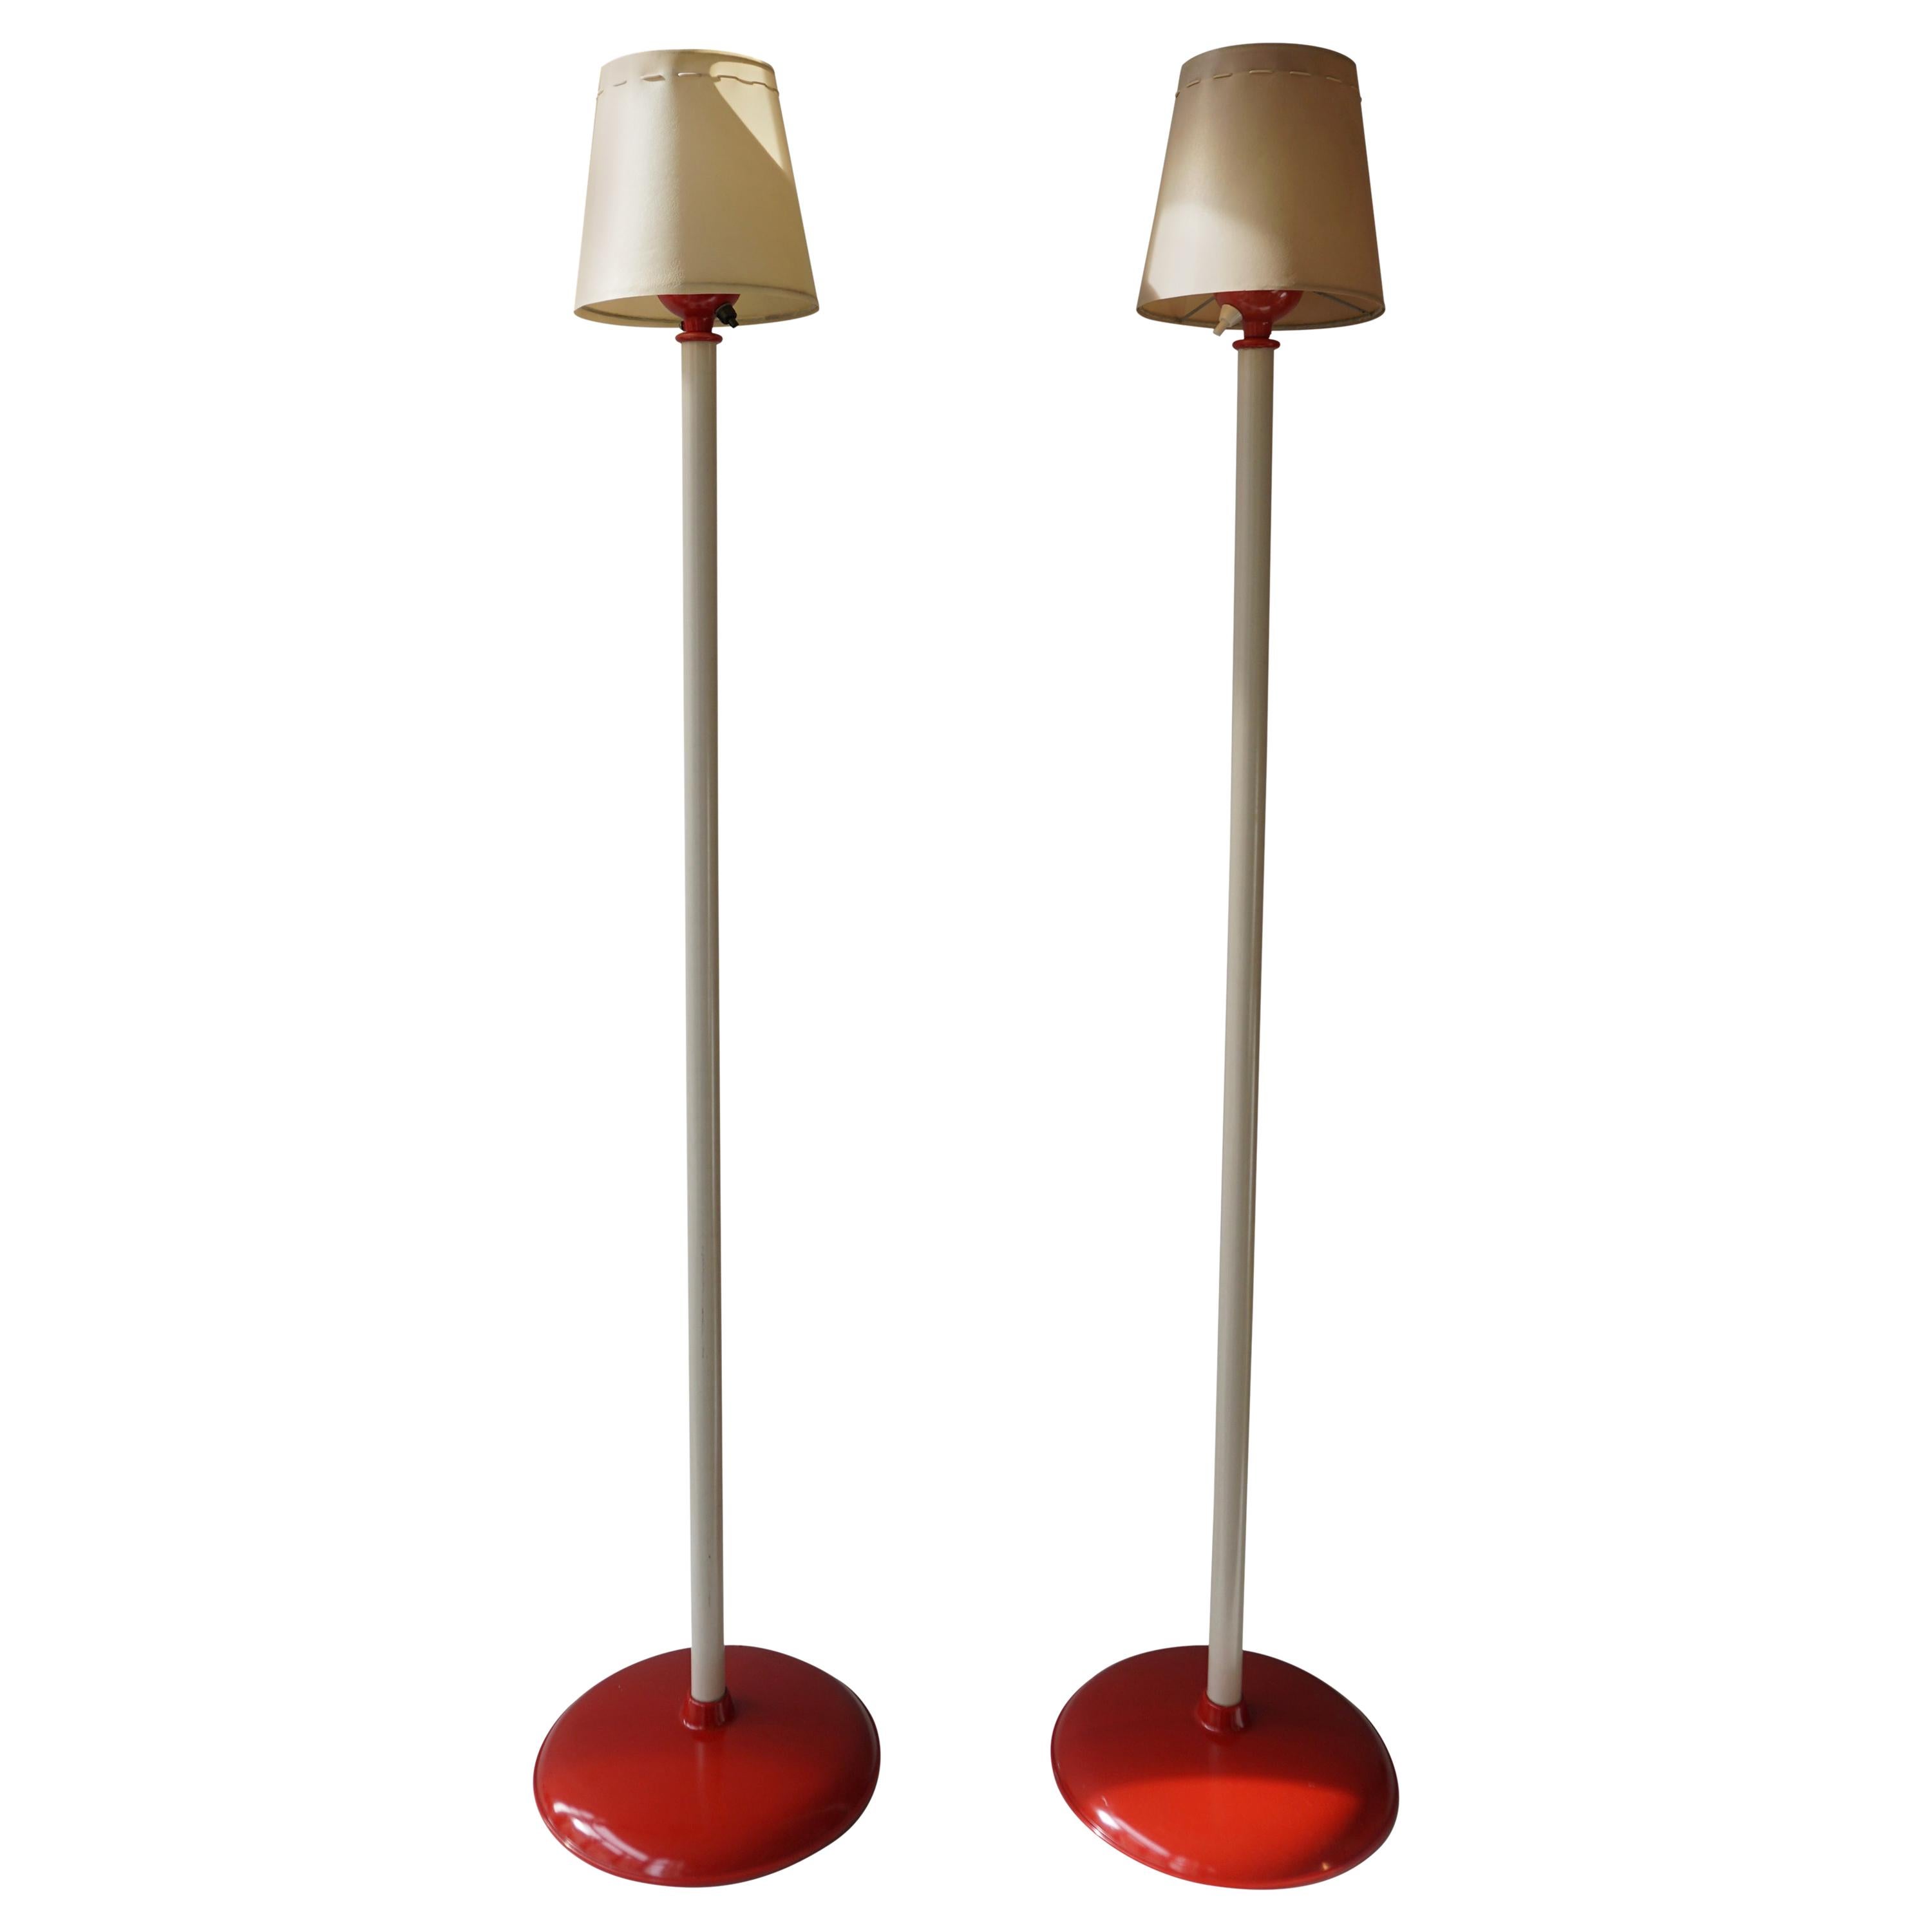 Two Red and White Floor Lamps